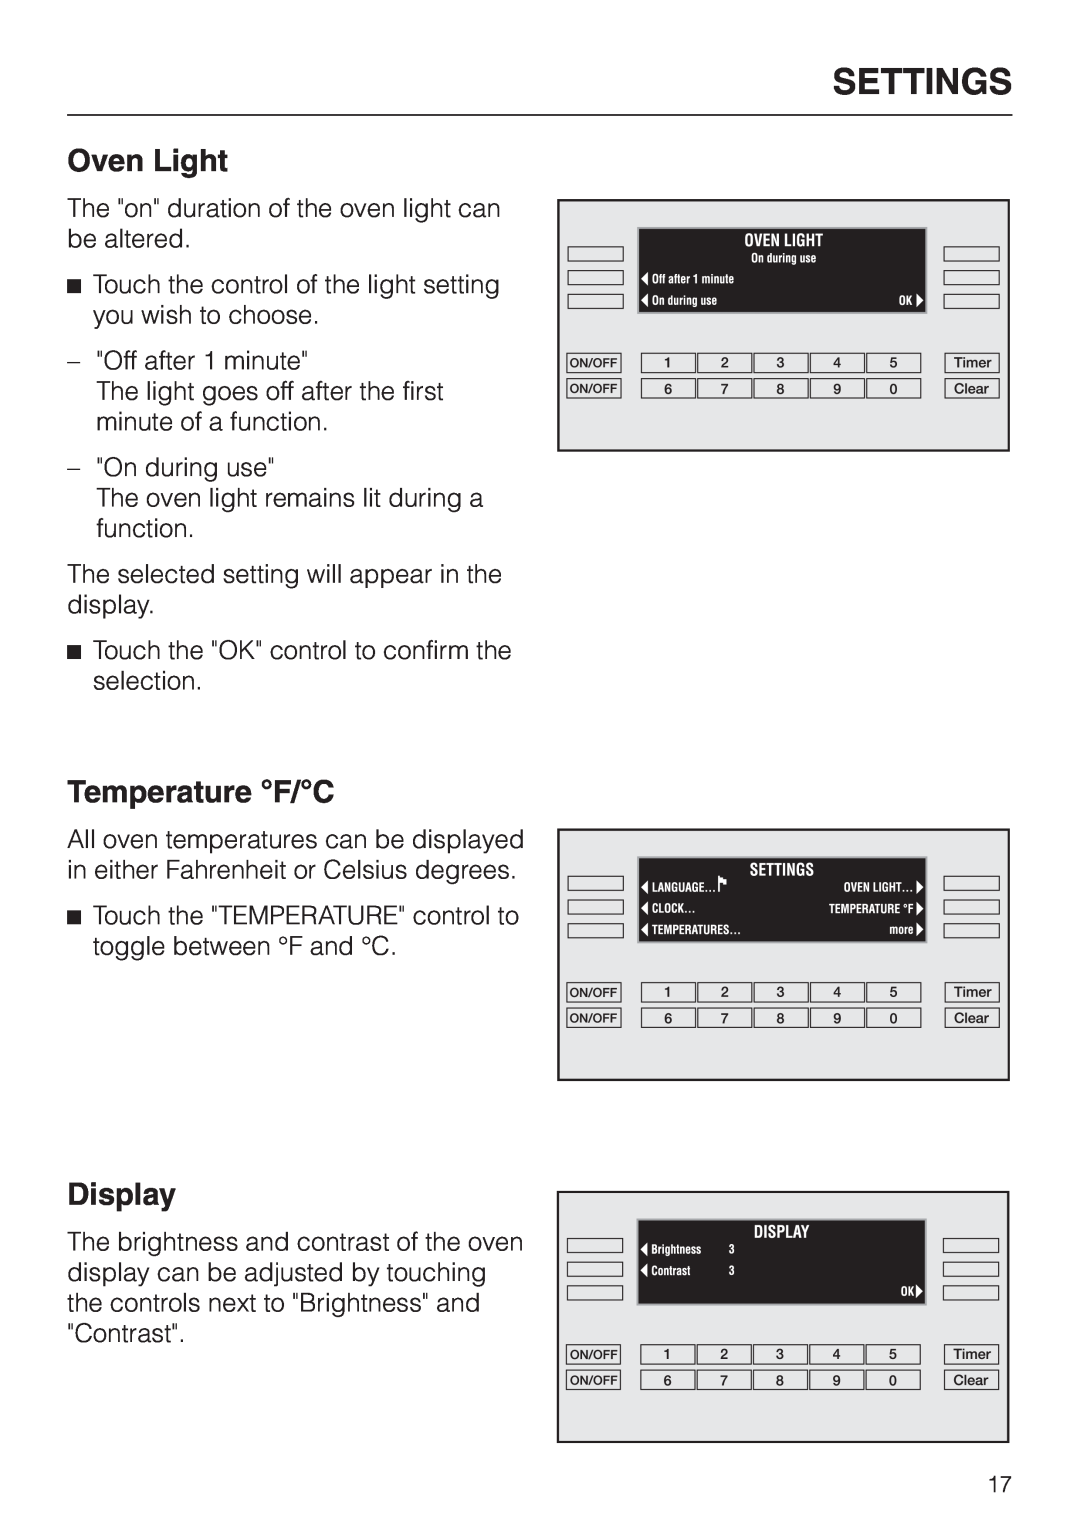 Miele H398BP2, H397BP2 operating instructions Oven Light, Temperature F/C, Display, Settings 